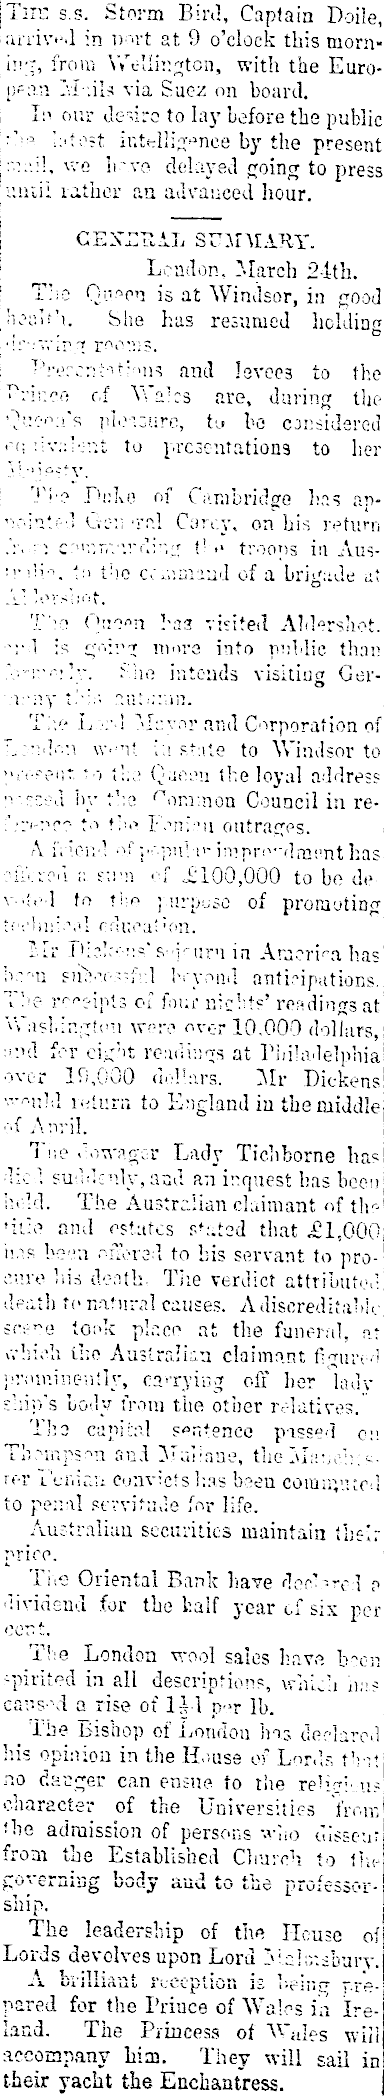 Papers Past | Newspapers | Hawke's Bay Times | 25 May 1868 | ARRIVAL OF THE  ENGLISH MAIL VIA SUEZ.